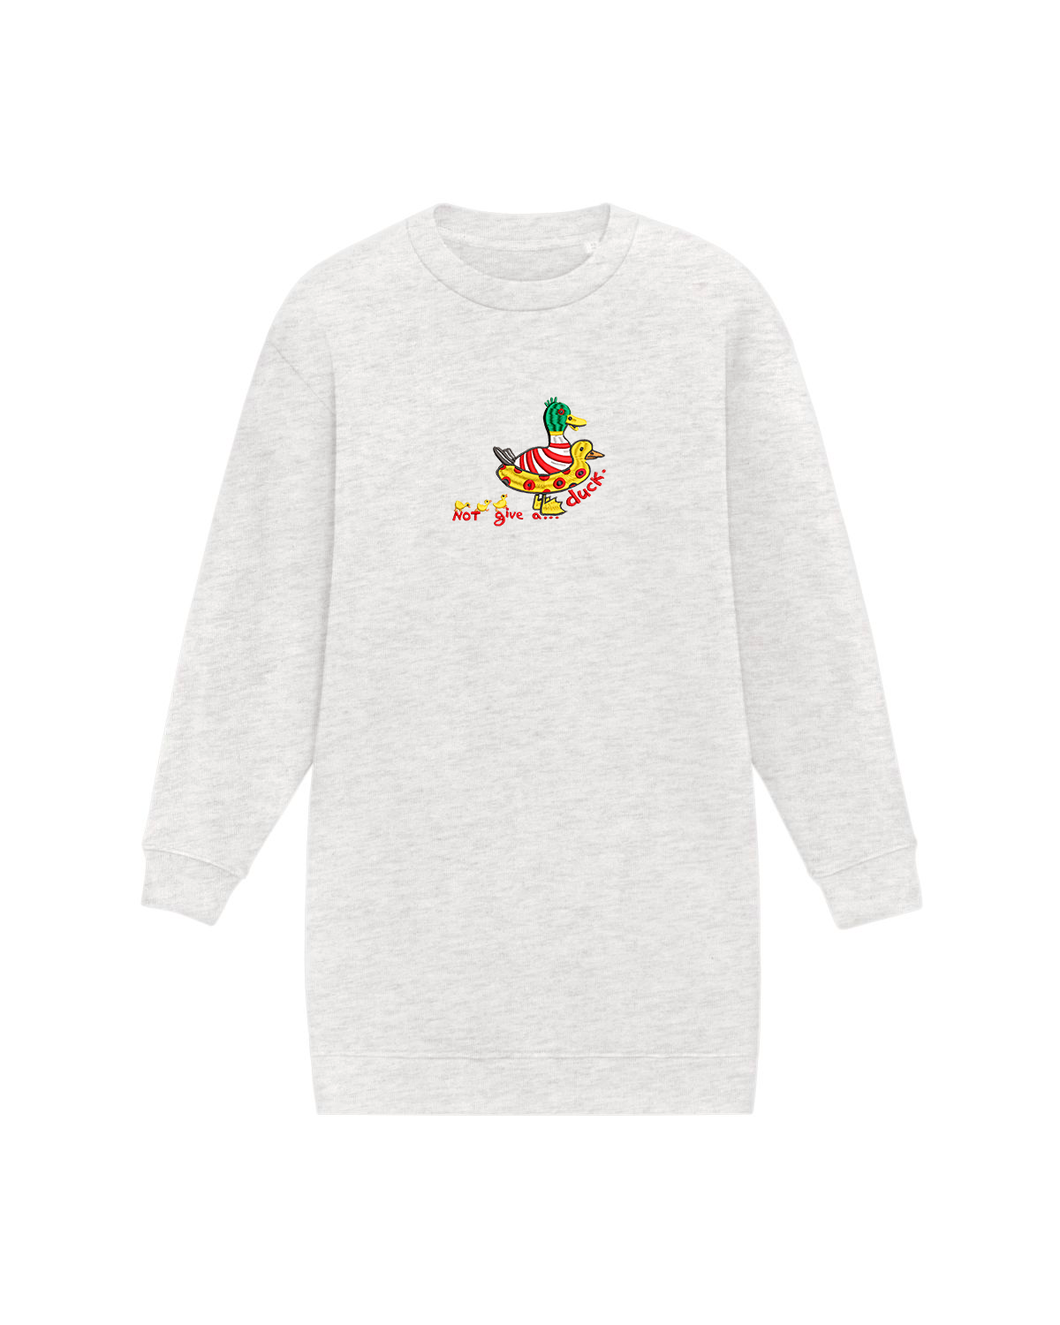 Not give a...duck. 🦆 -  Embroidered WOMEN'S OVERSIZED CREW NECK DRESS